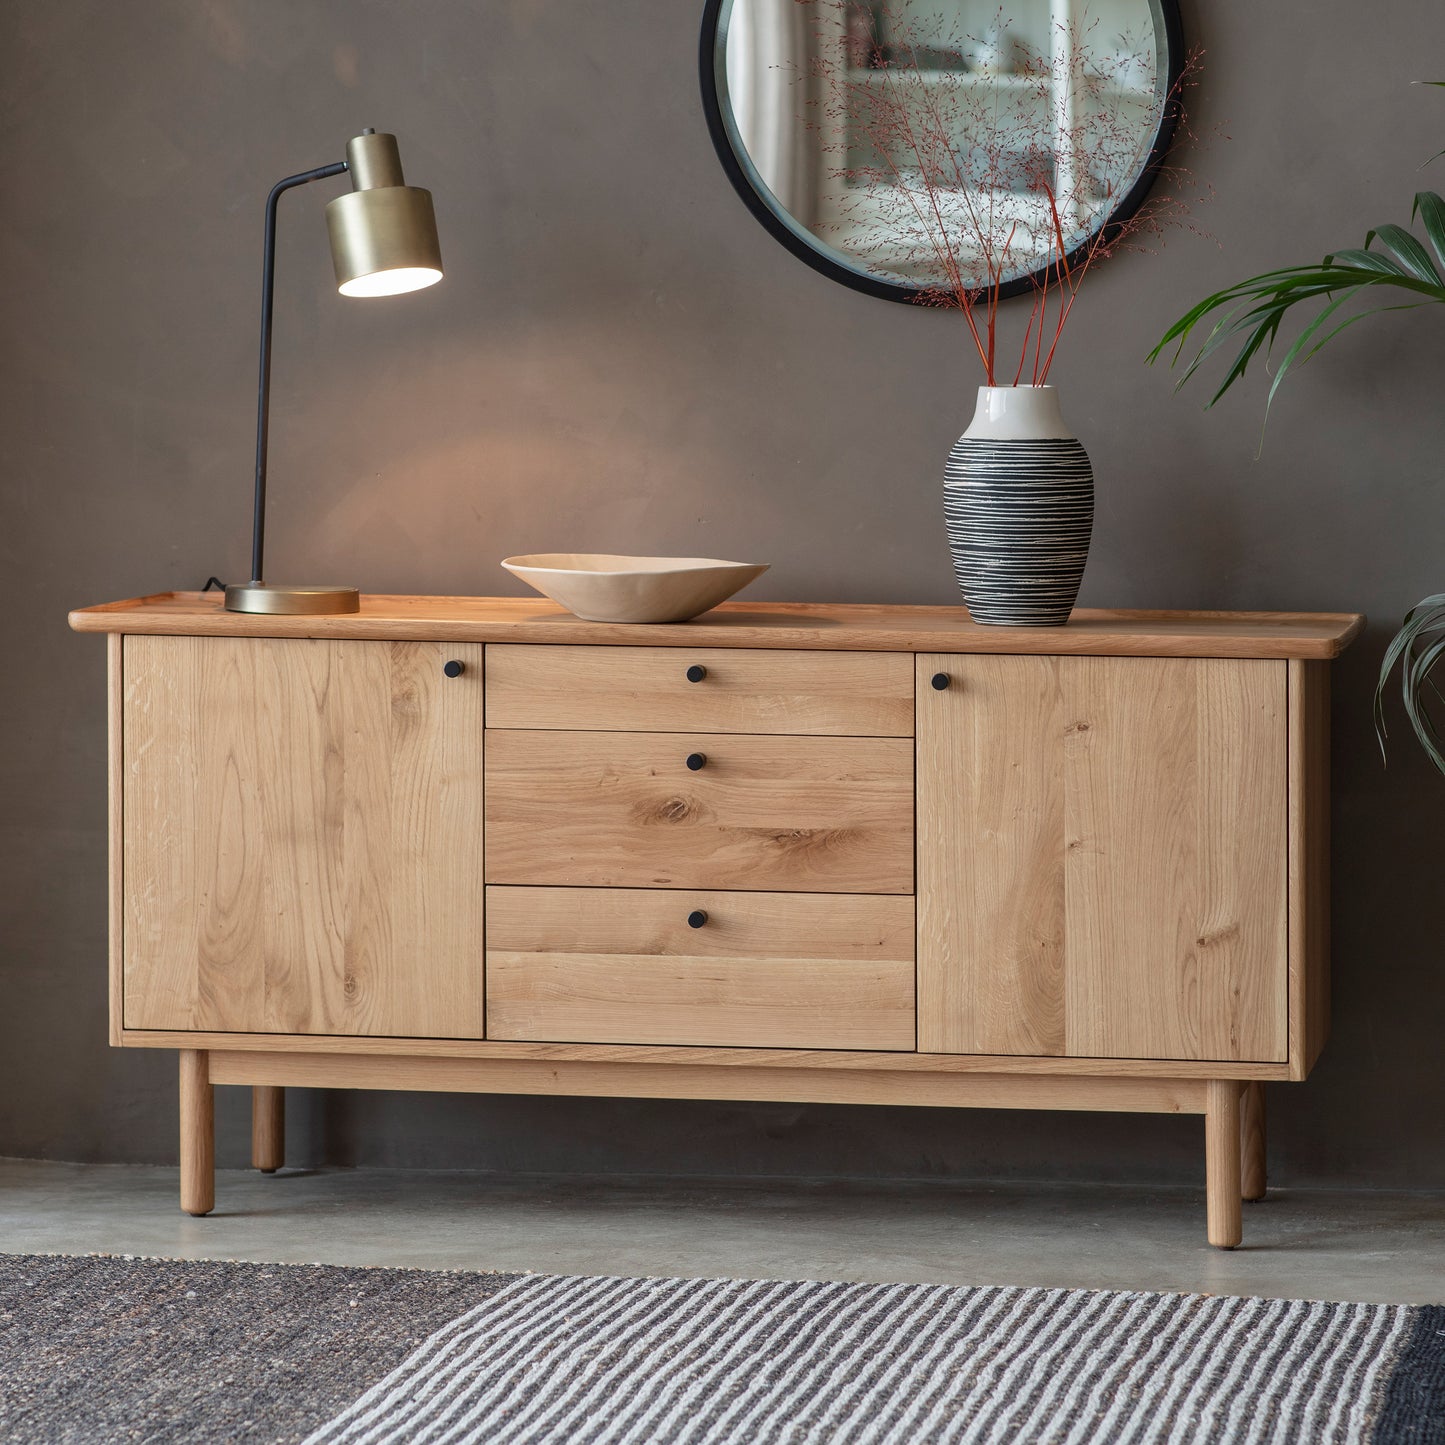 A Wembury 2 Door 3 Drawer Sideboard 1500x450x710mm with drawers and a mirror for your interior decor from Kikiathome.co.uk.